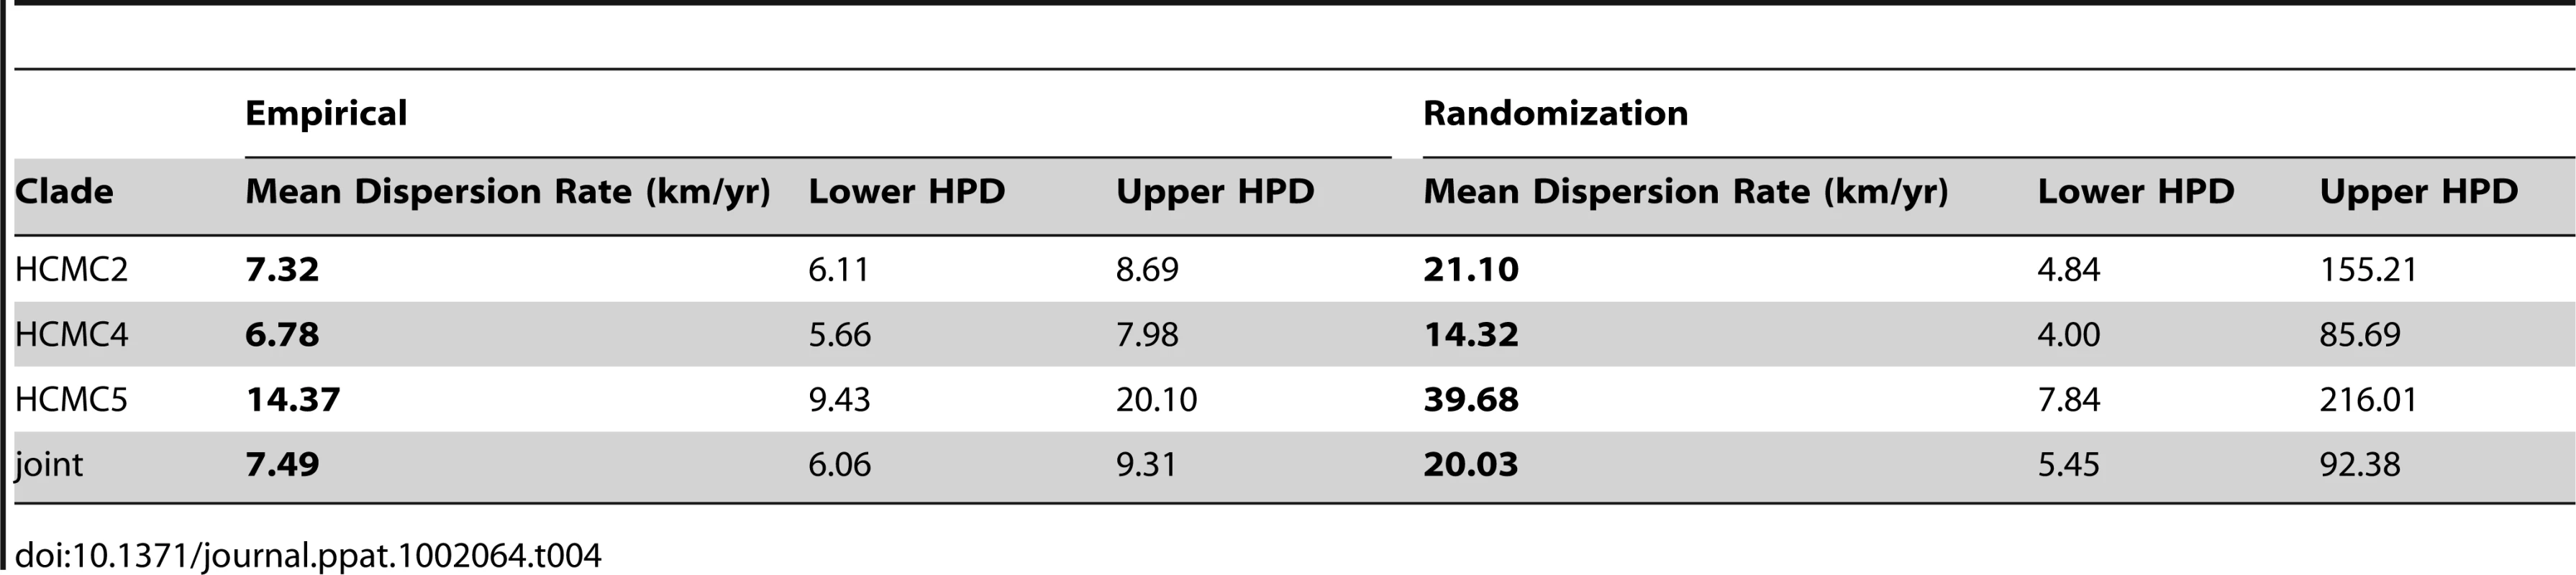 Results from randomizing locations at the tips to test the upper limits of the dispersion rates of DENV-1 in HCMC, Viet Nam.